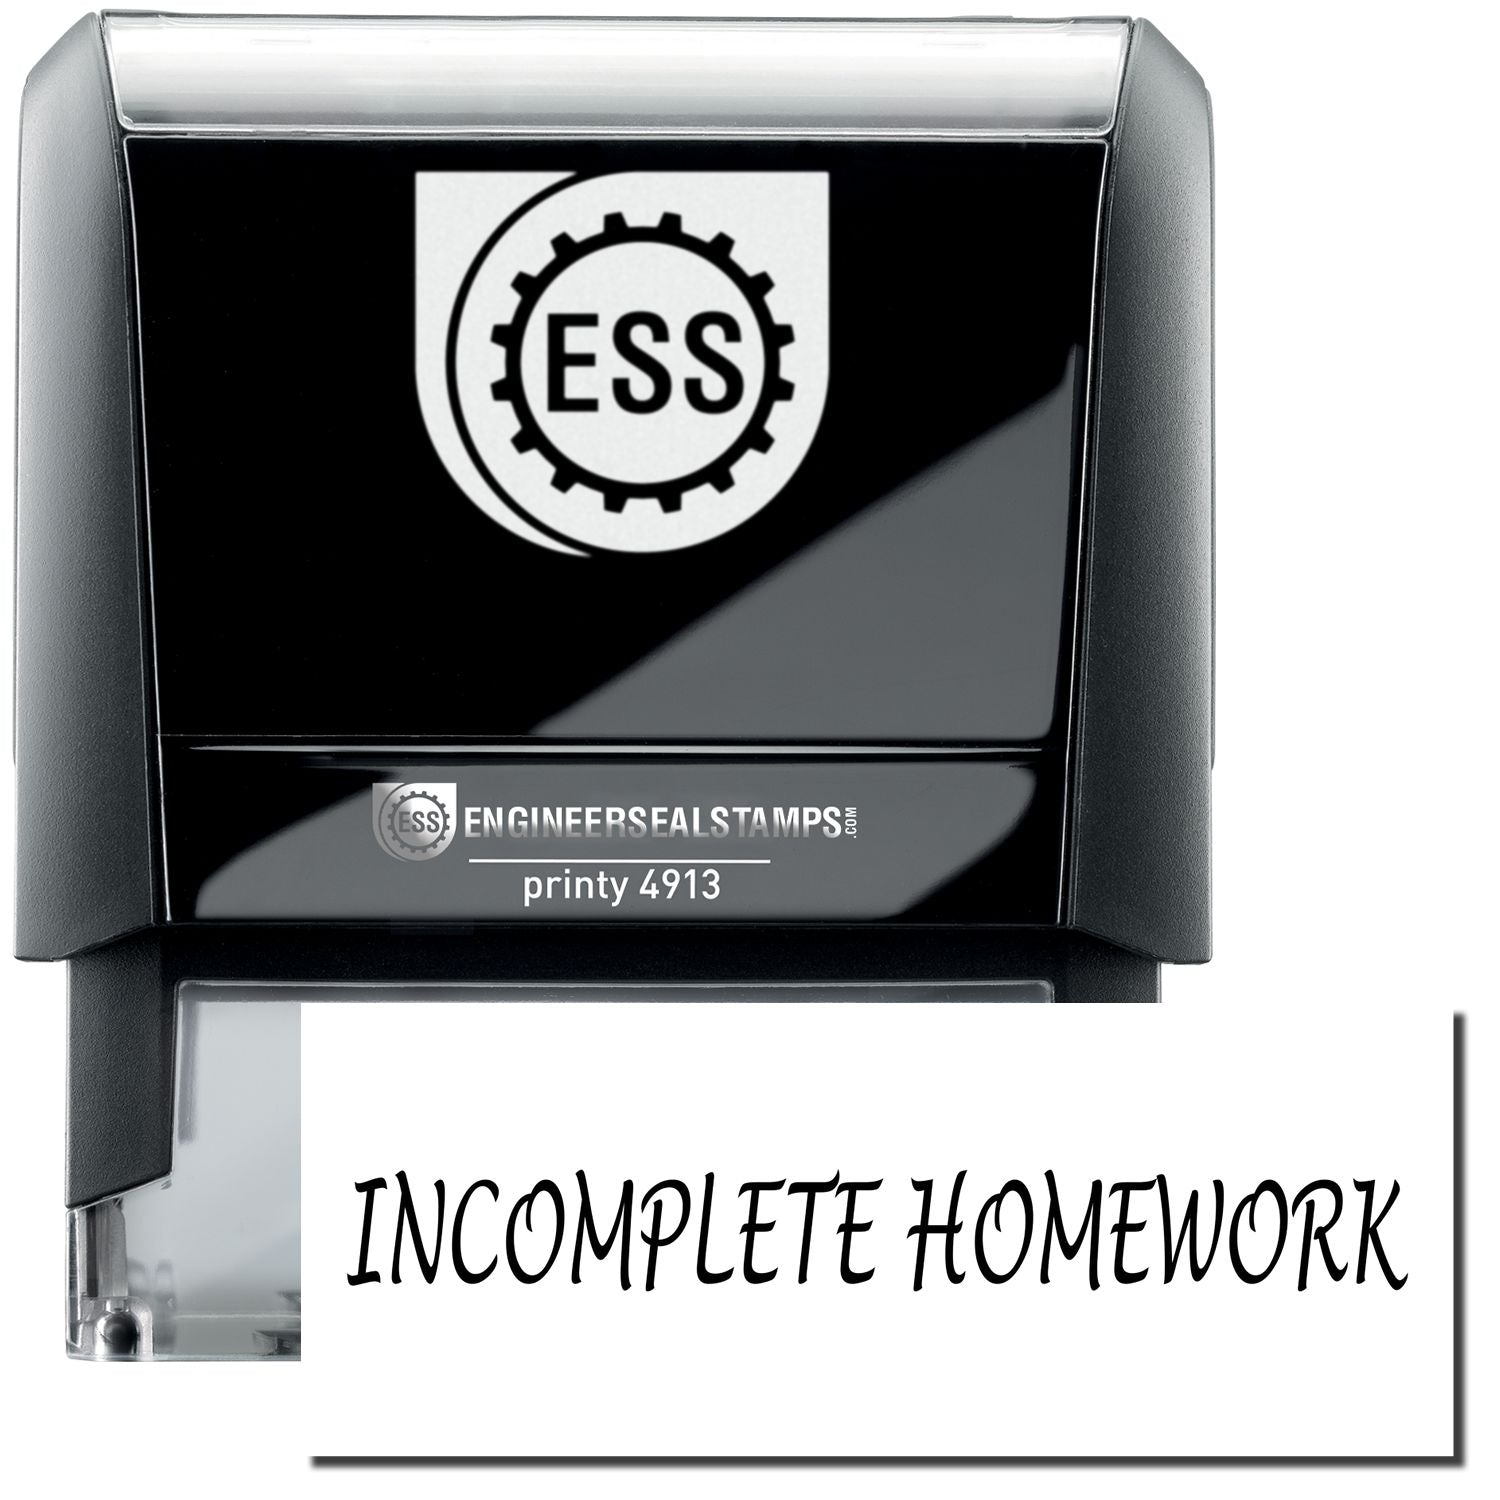 A self-inking stamp with a stamped image showing how the text "INCOMPLETE HOMEWORK" in a unique large font is displayed after stamping.